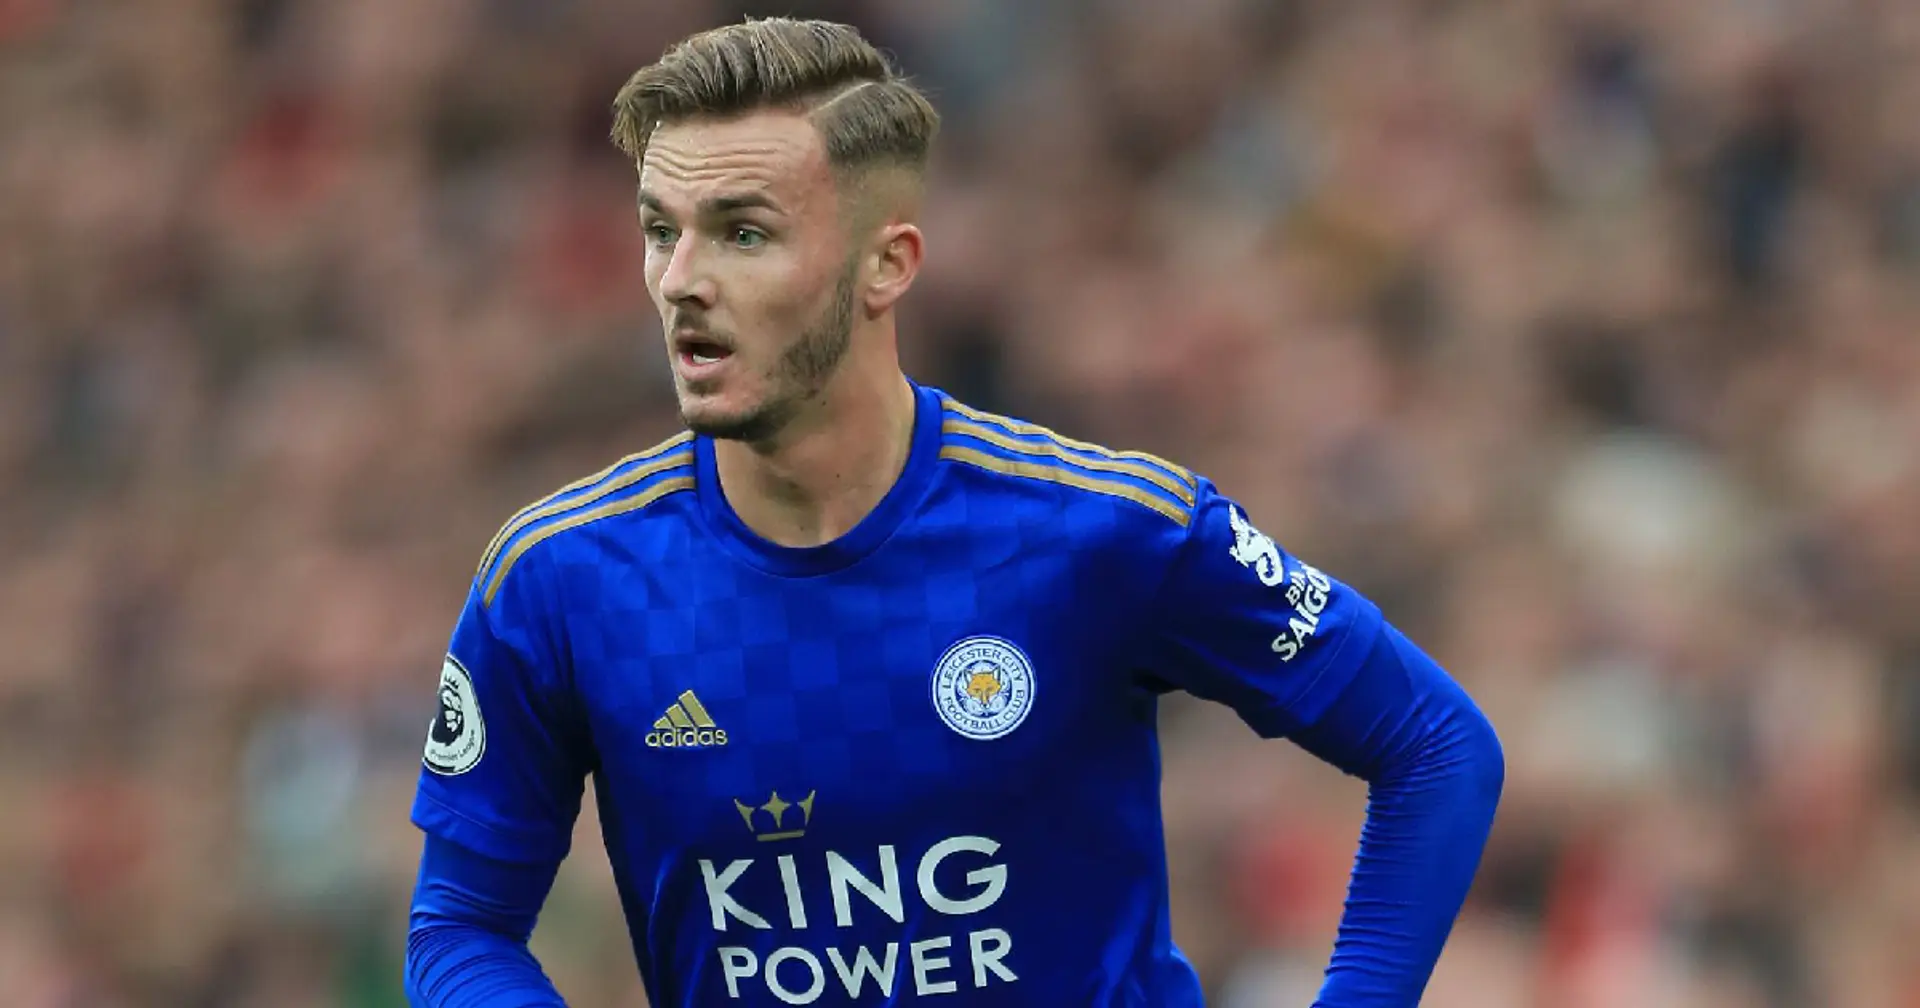 'Of course, I am': James Maddison reveals he is staying put at Leicester City